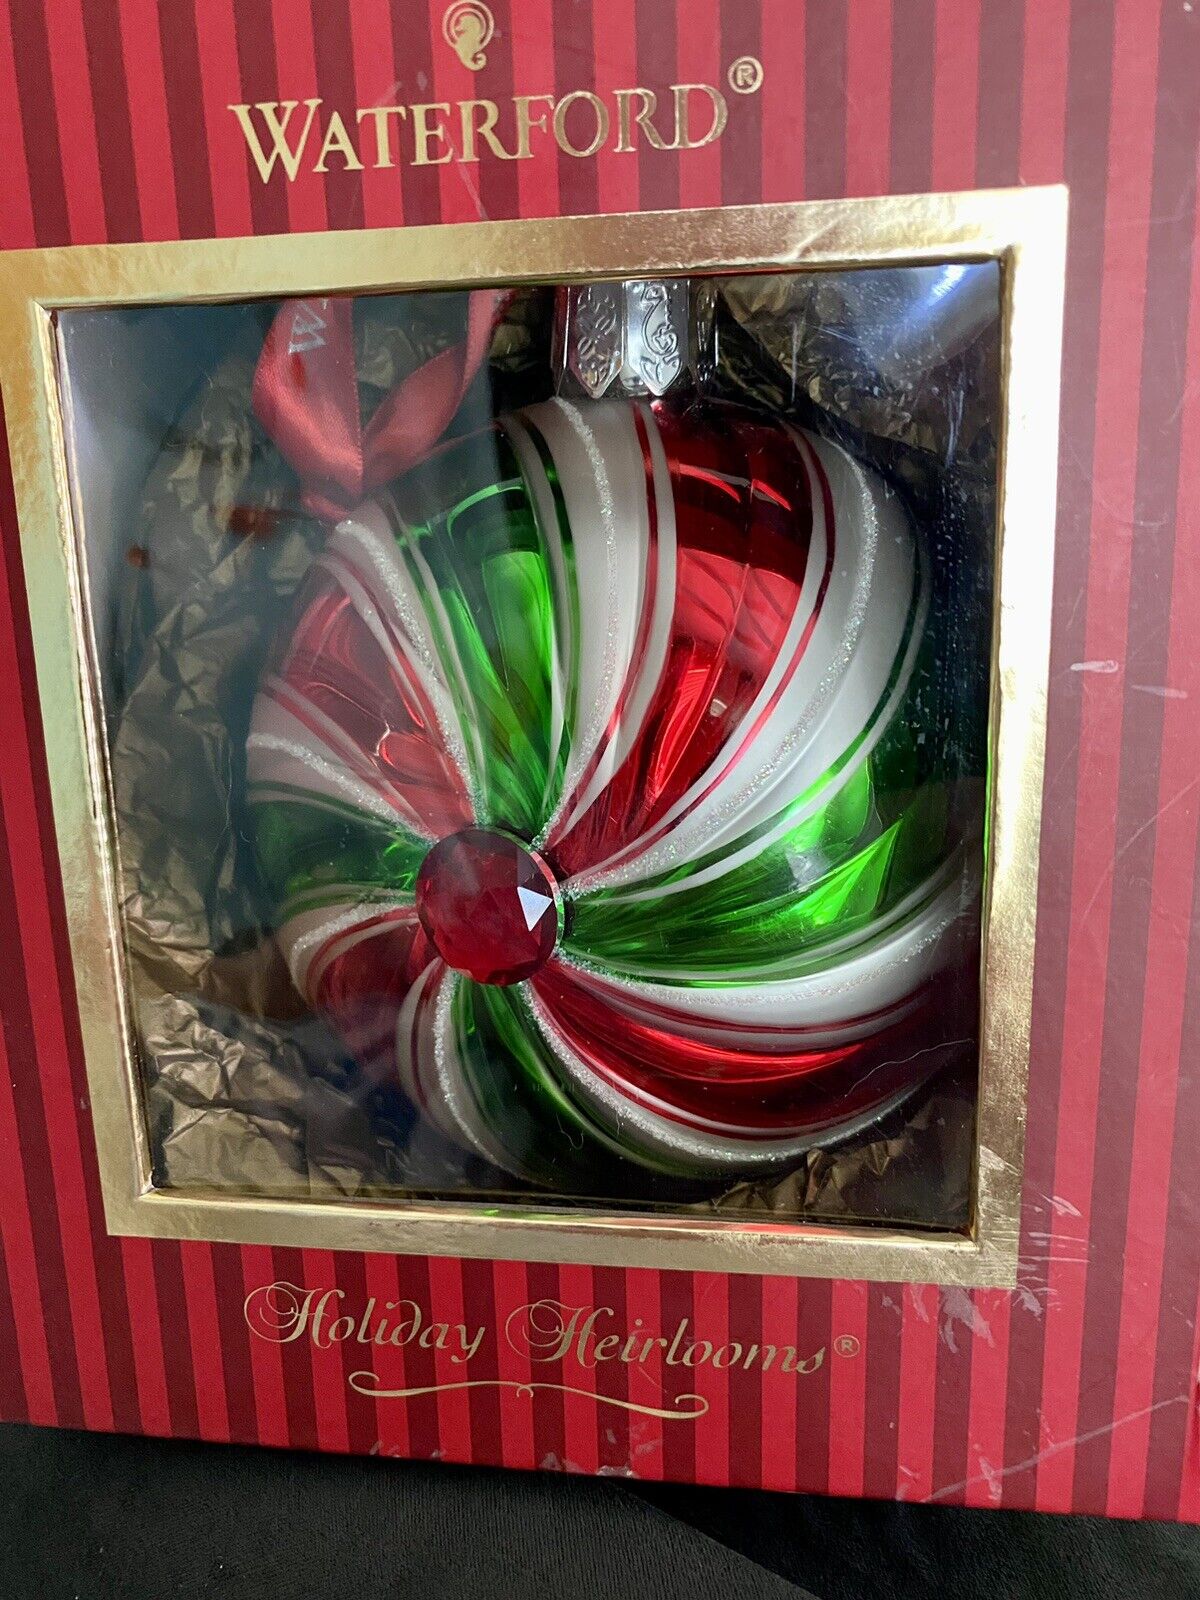 Waterford Holiday Heirlooms GIANT PEPPERMINT GLASS ORNAMENT BOXED 2005